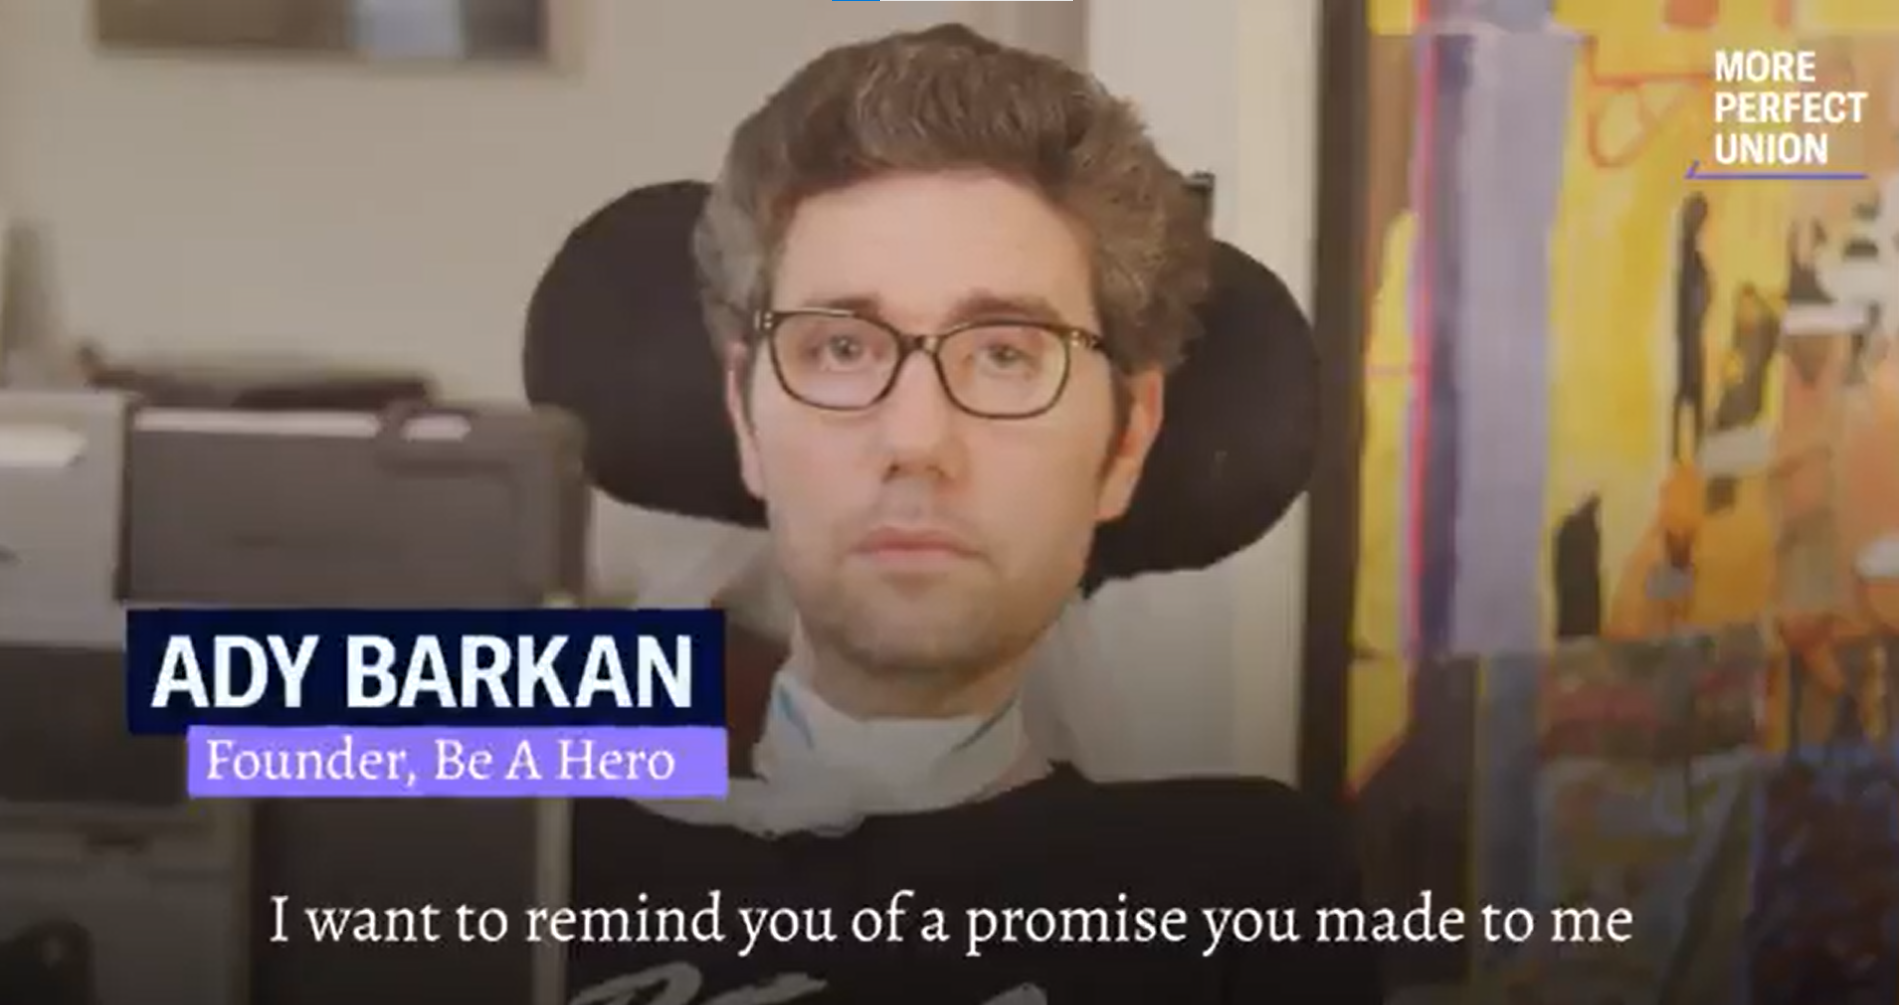 "In a few days, at the WTO meeting, all eyes will be on America," said Medicare for All advocate Ady Barkan on April 29, 2021. (Photo: Twitter screengrab via More Perfect Union)